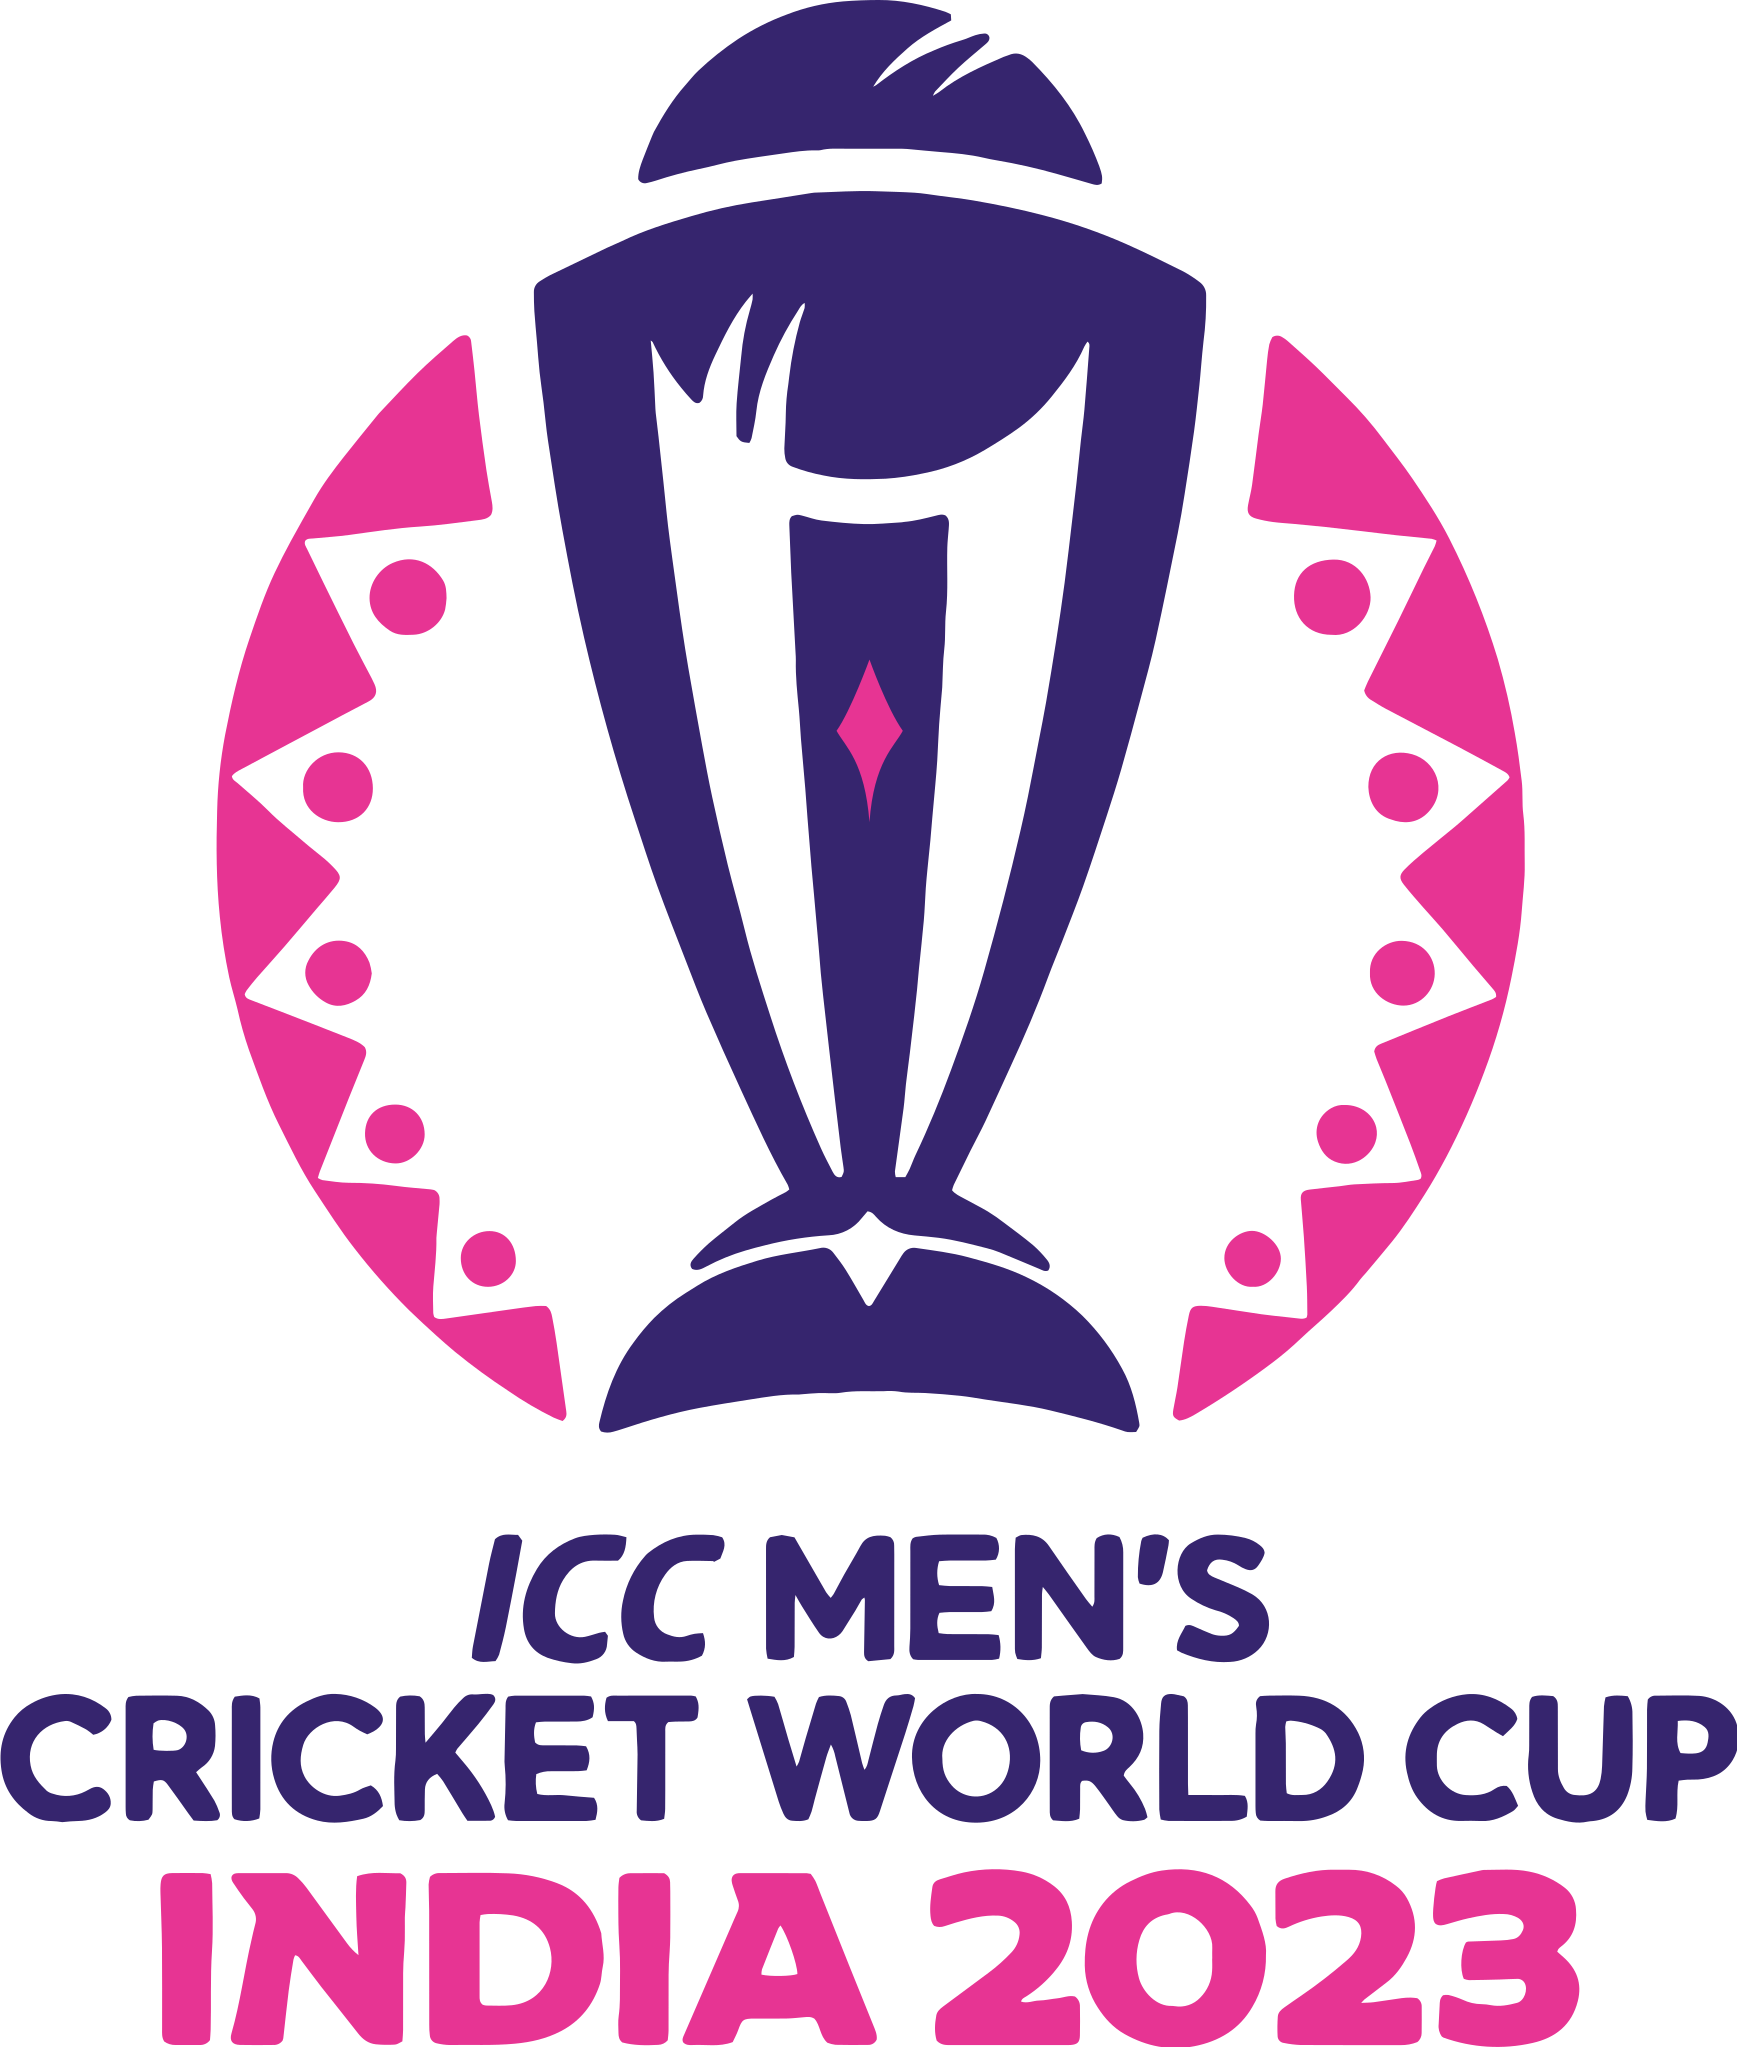 Crictime Scorecard and Live Cricket Scores World Cup 2023